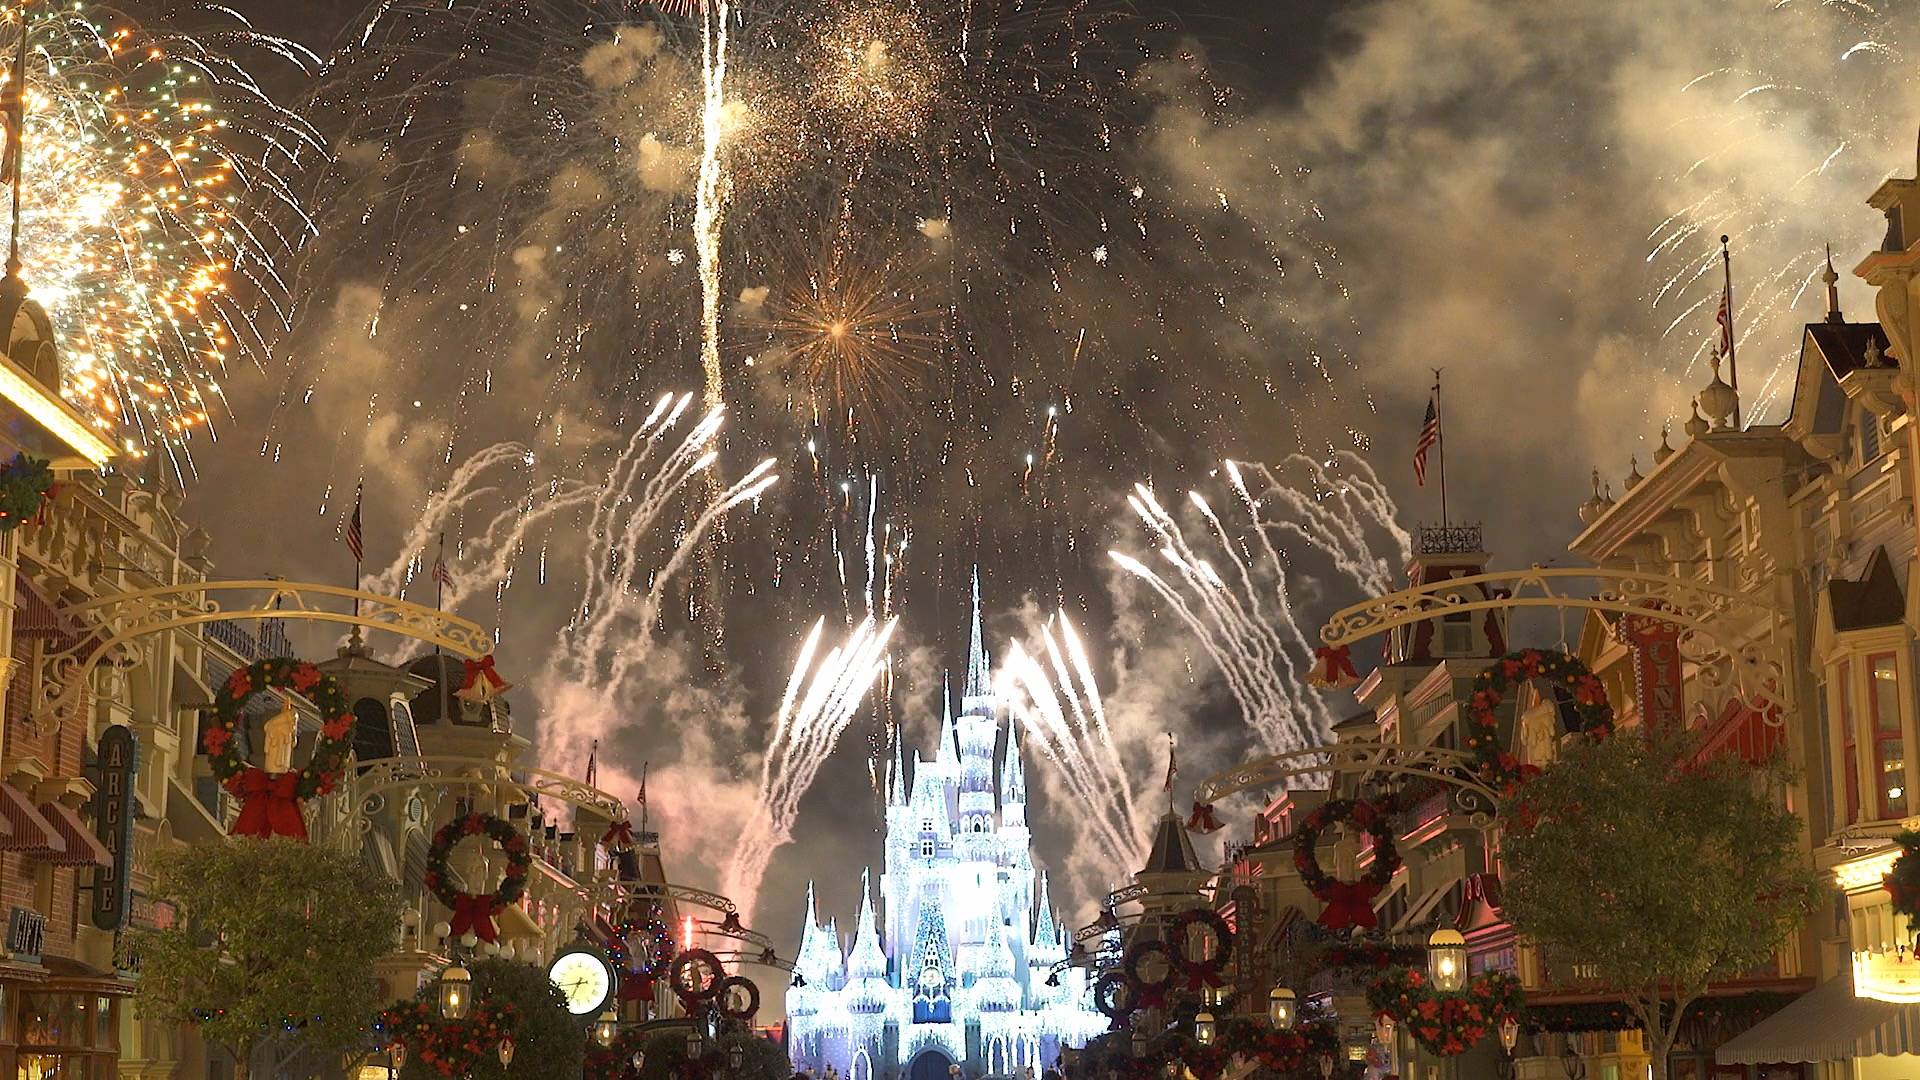 Multi-angle video of Holiday Wishes now available